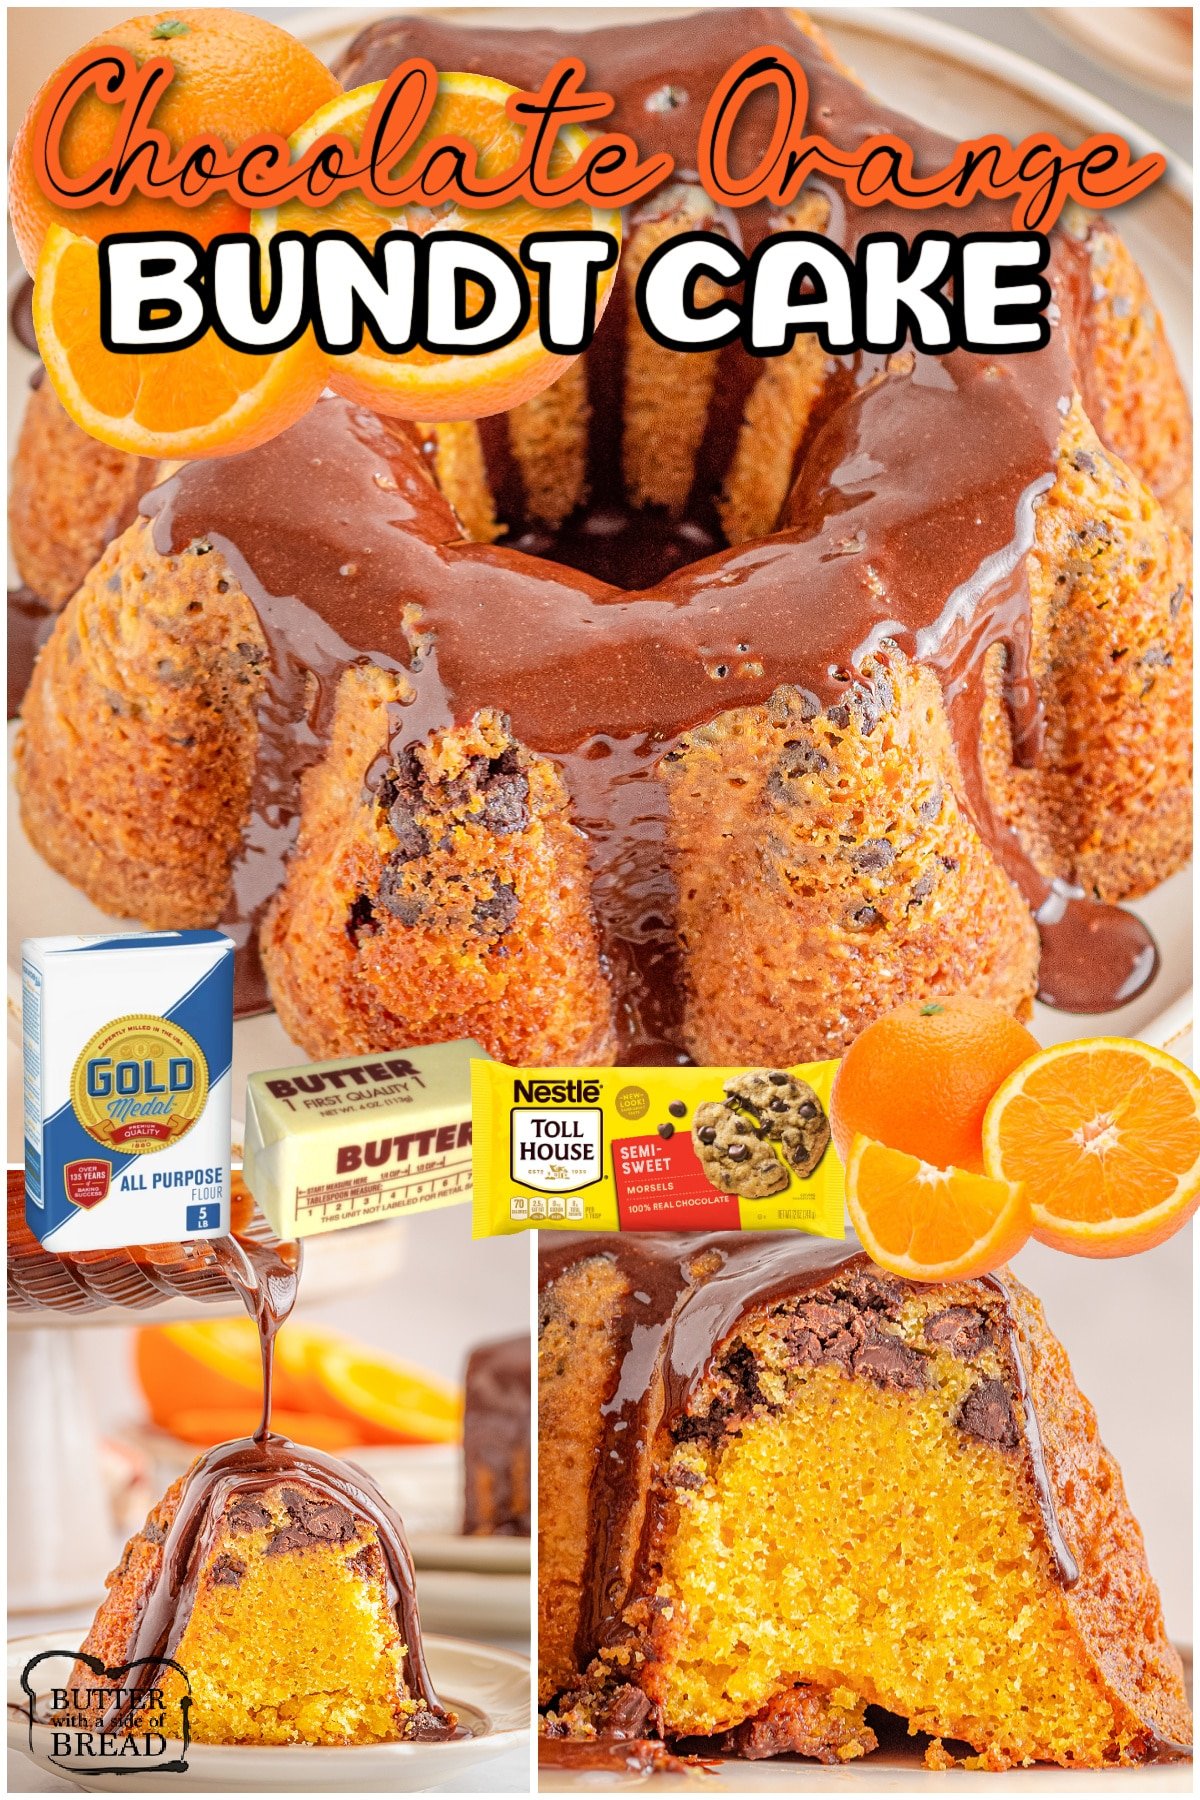 Chocolate Orange Bundt Cake is a delicious bundt cake made with orange juice & zest, chocolate chips, and topped with a chocolate glaze. Perfect cake for chocolate + orange lovers!